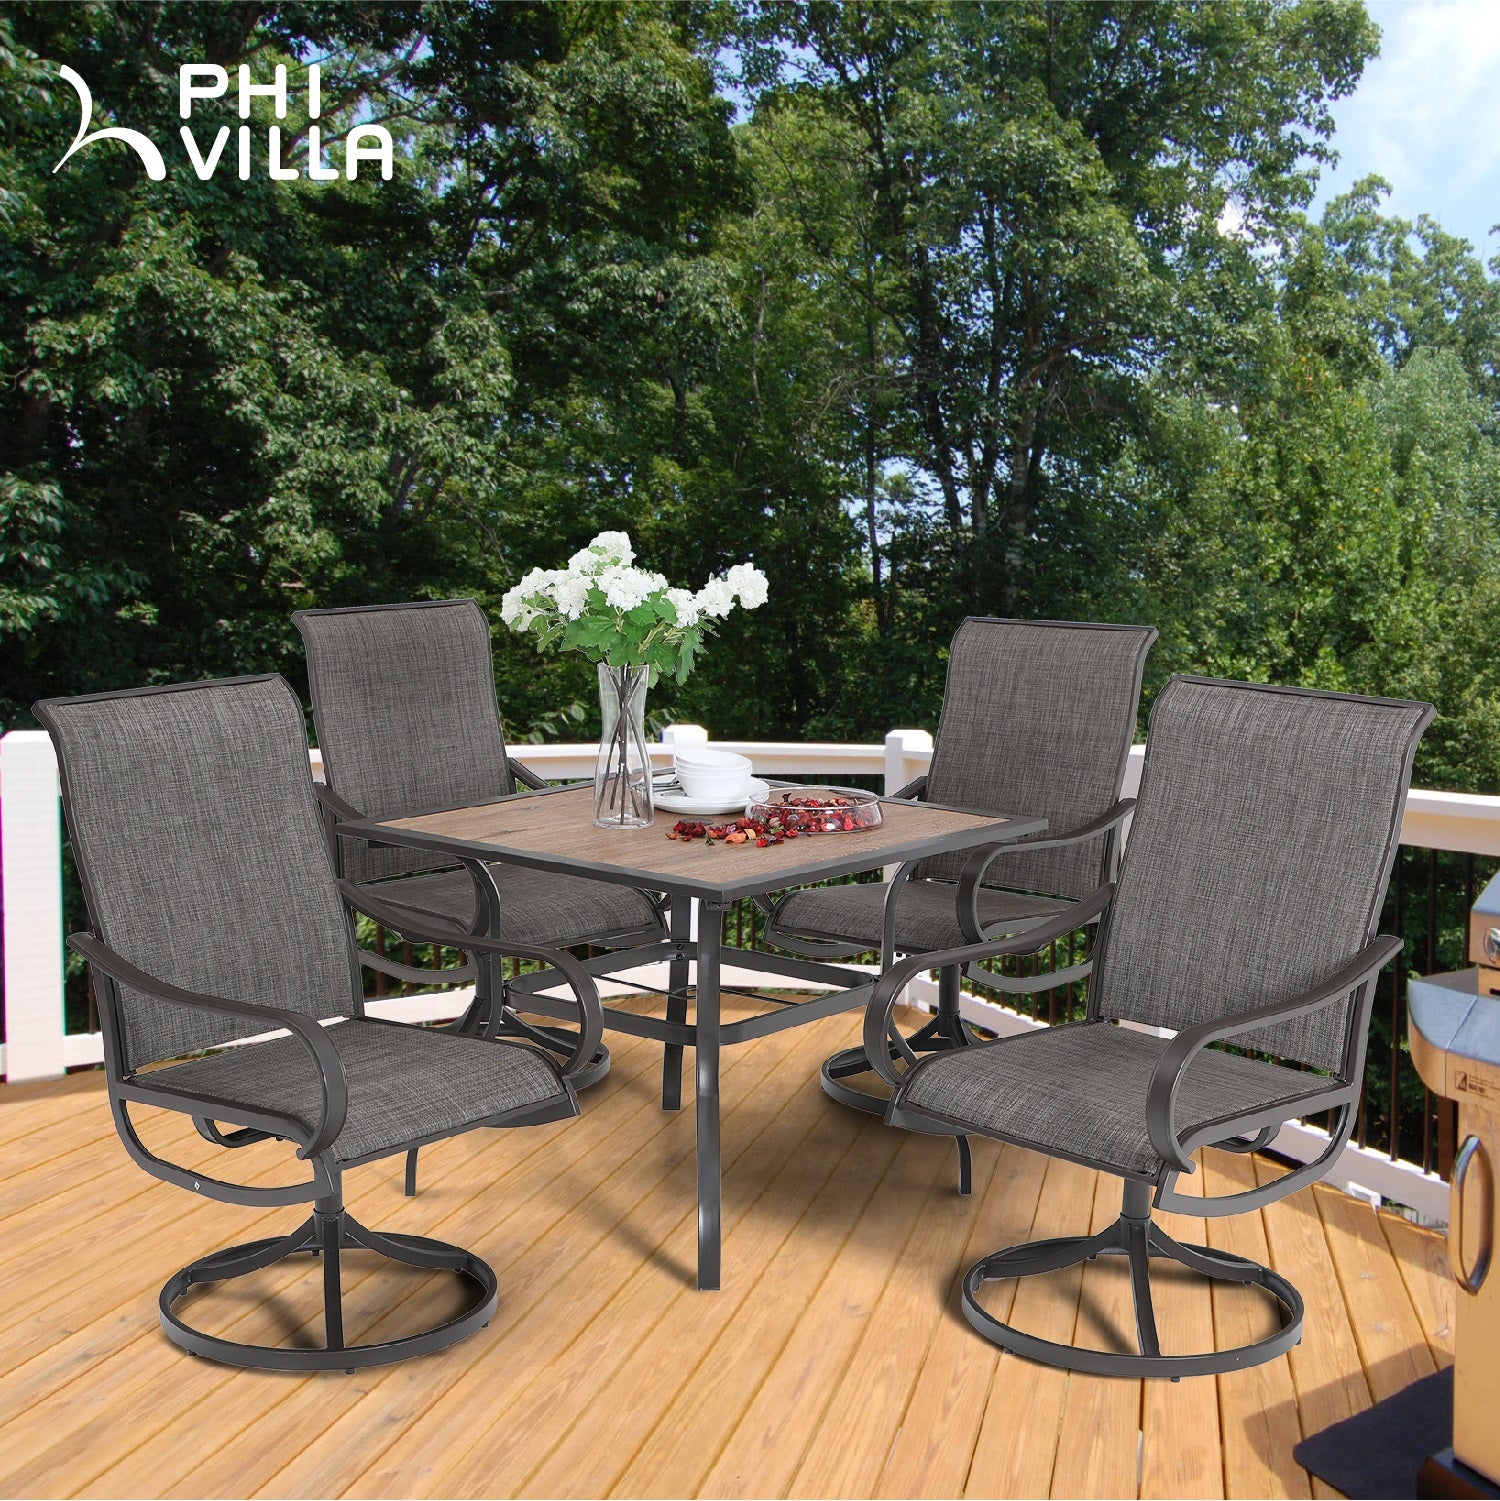 Phi Villa Wood-Look Brown Frame Patio Dining Table with Umbrella Hole